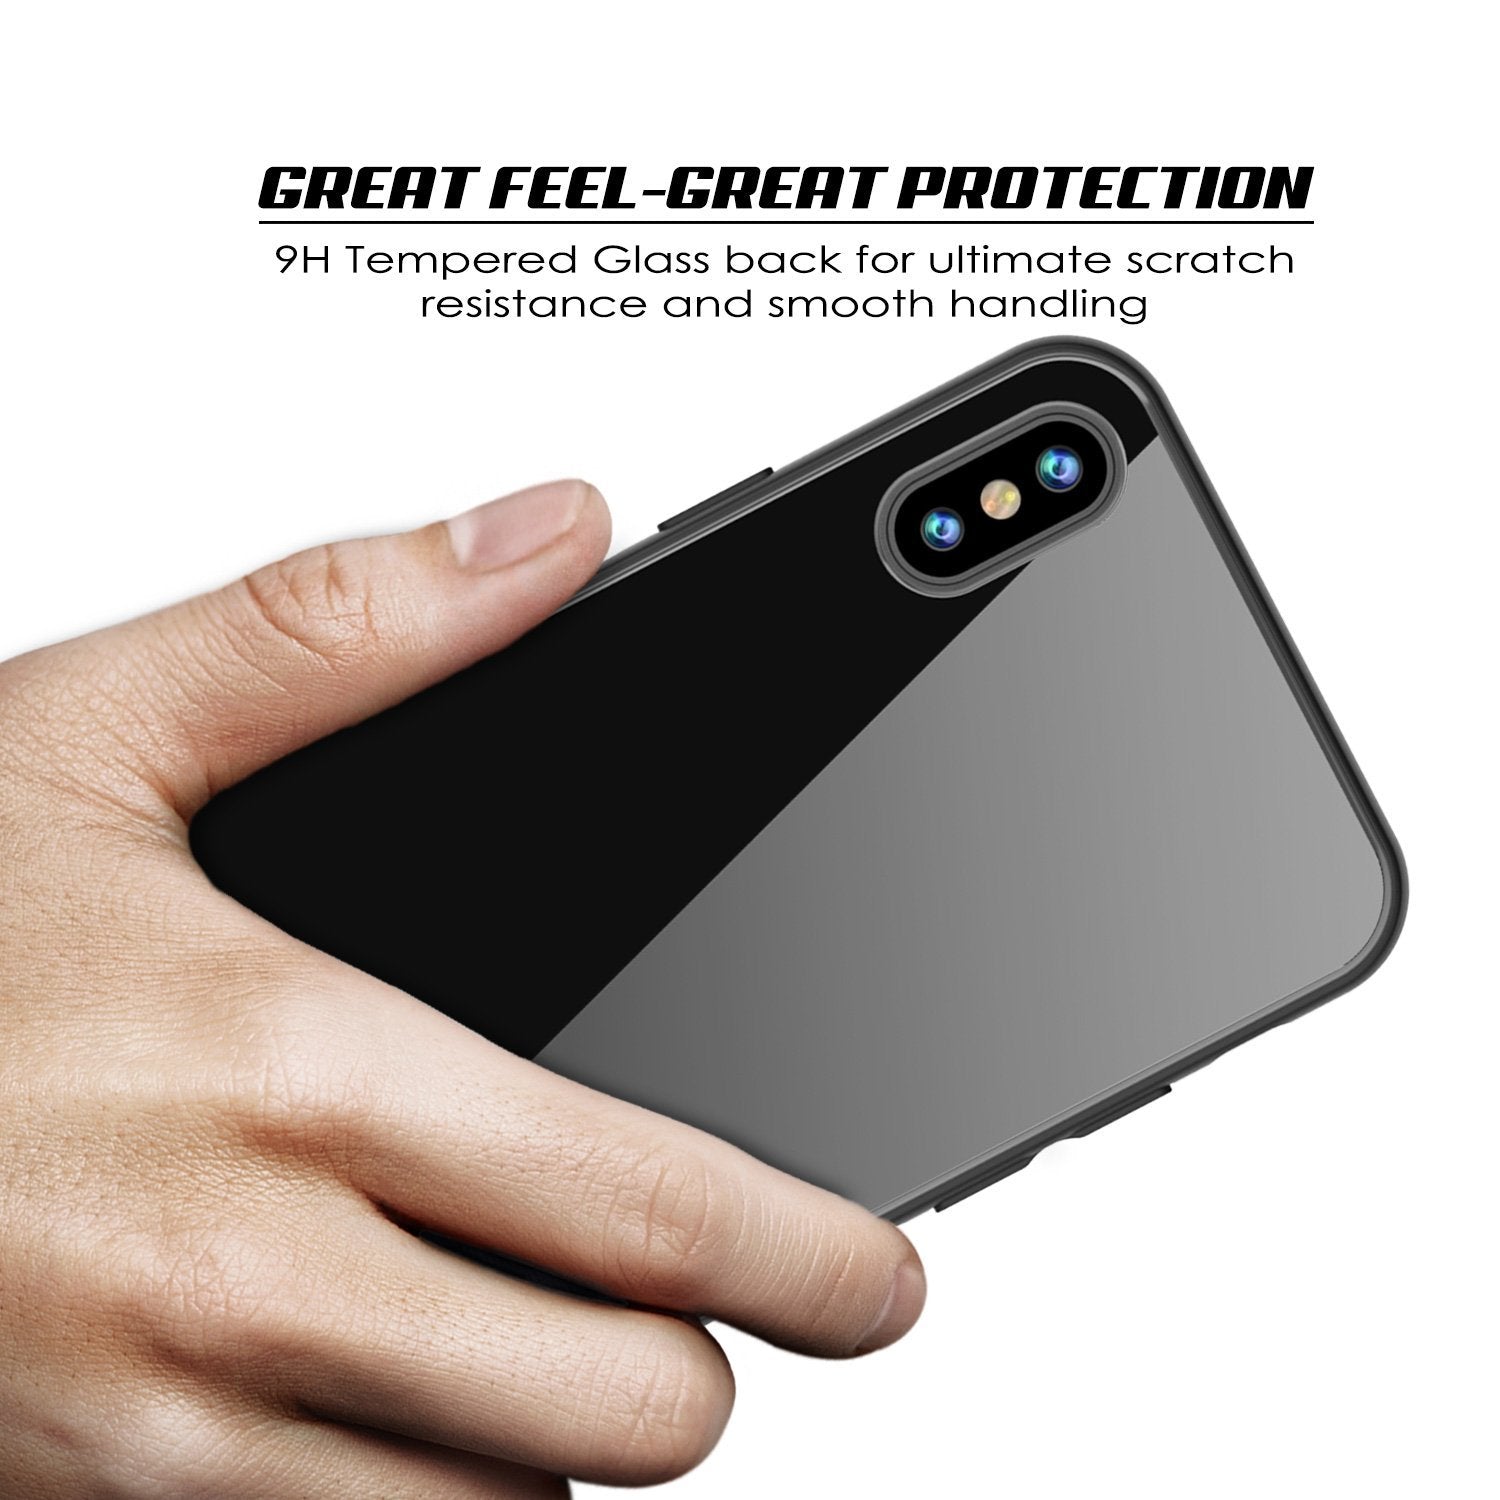 iPhone 8 Case, Punkcase GlassShield Ultra Thin Protective 9H Full Body Tempered Glass Cover W/ Drop Protection & Non Slip Grip for Apple iPhone 7 / Apple iPhone 8 (Black) - PunkCase NZ